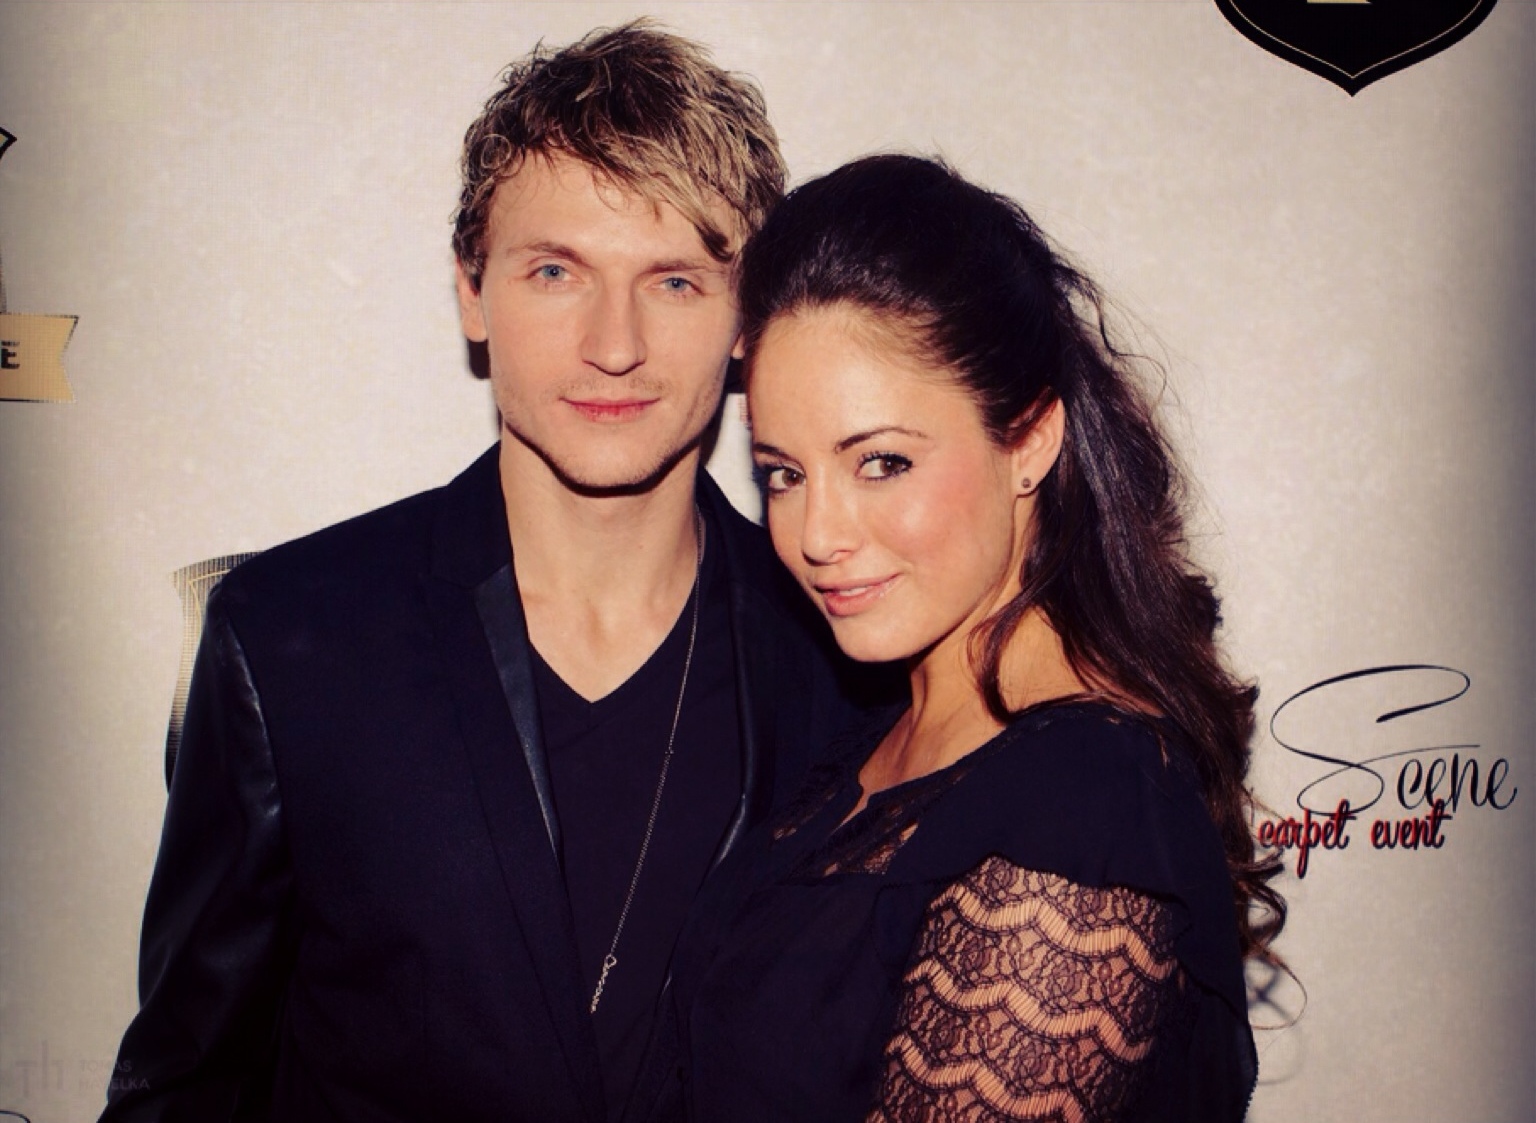 Chad Rook and Raquel Riskin at the BE SCENE Red Carpet Event